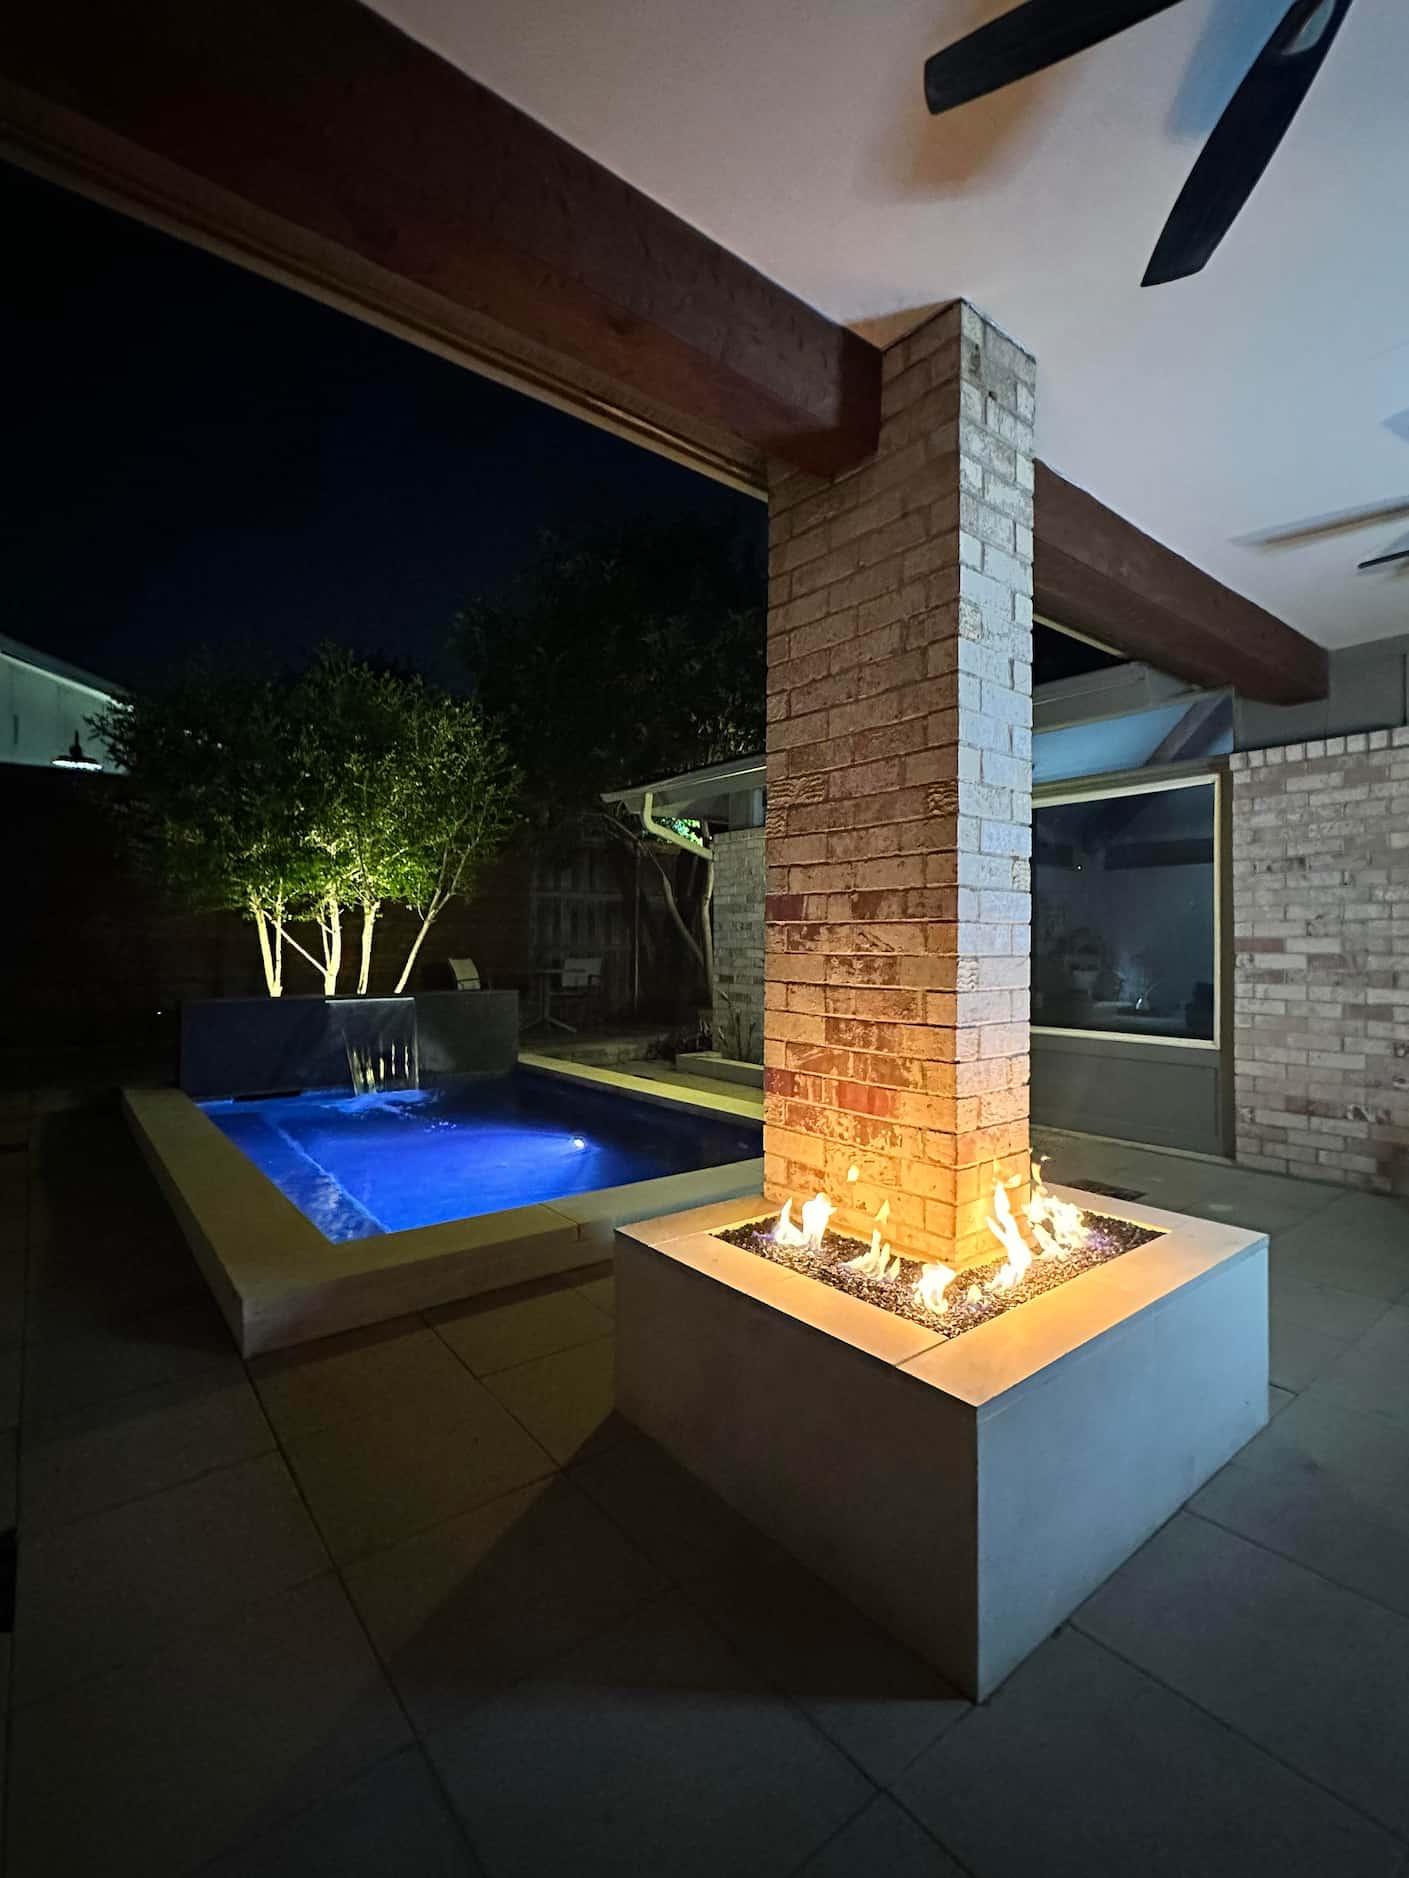 Cocktail pool at night with fire pit